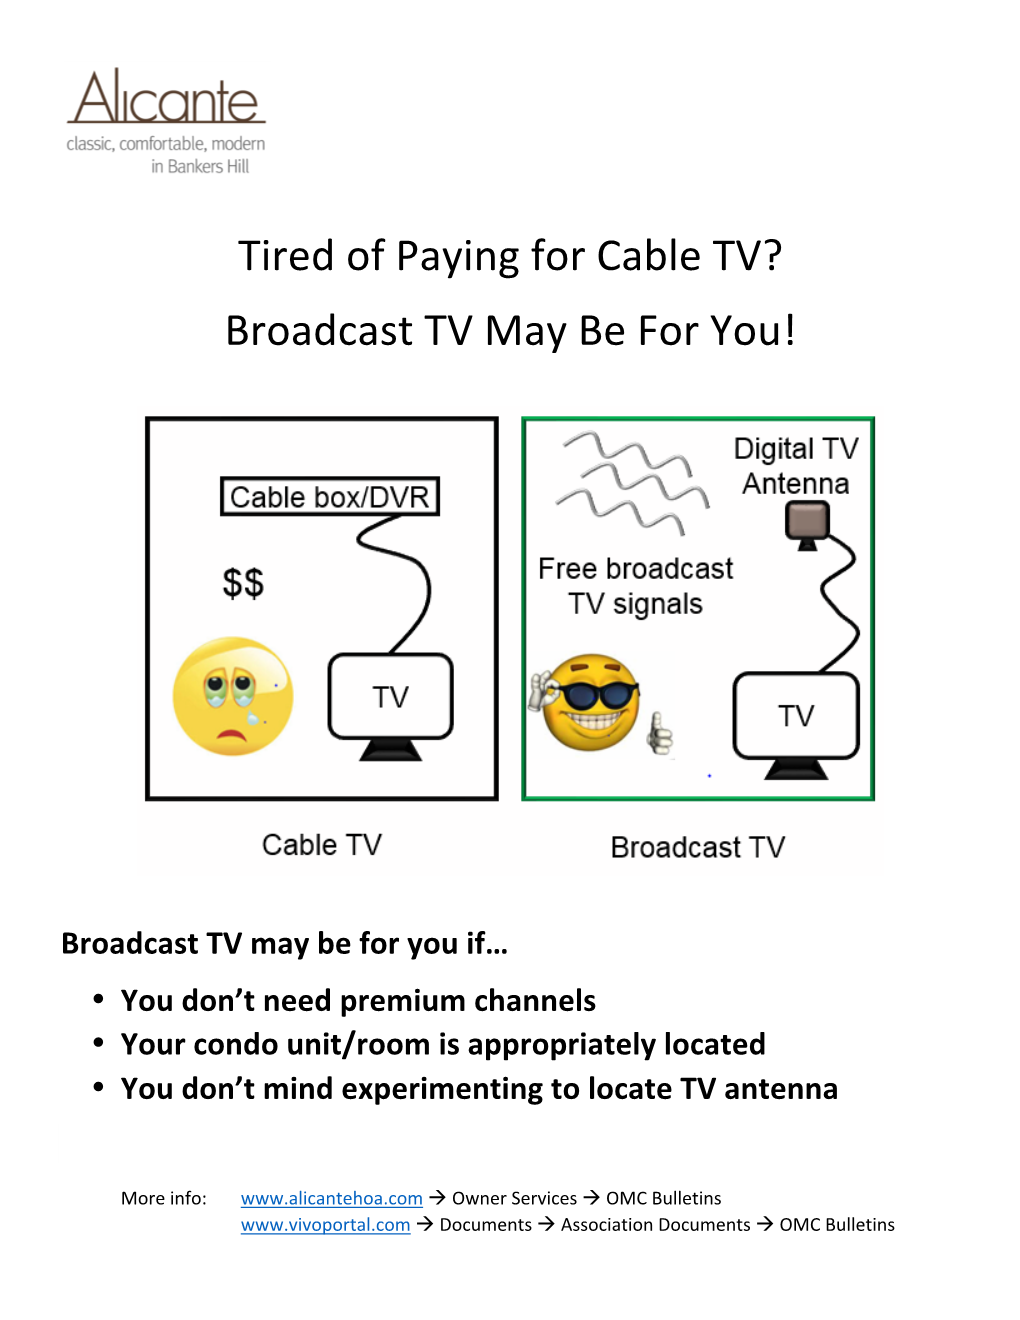 Tired of Paying for Cable TV? Broadcast TV May Be for You!